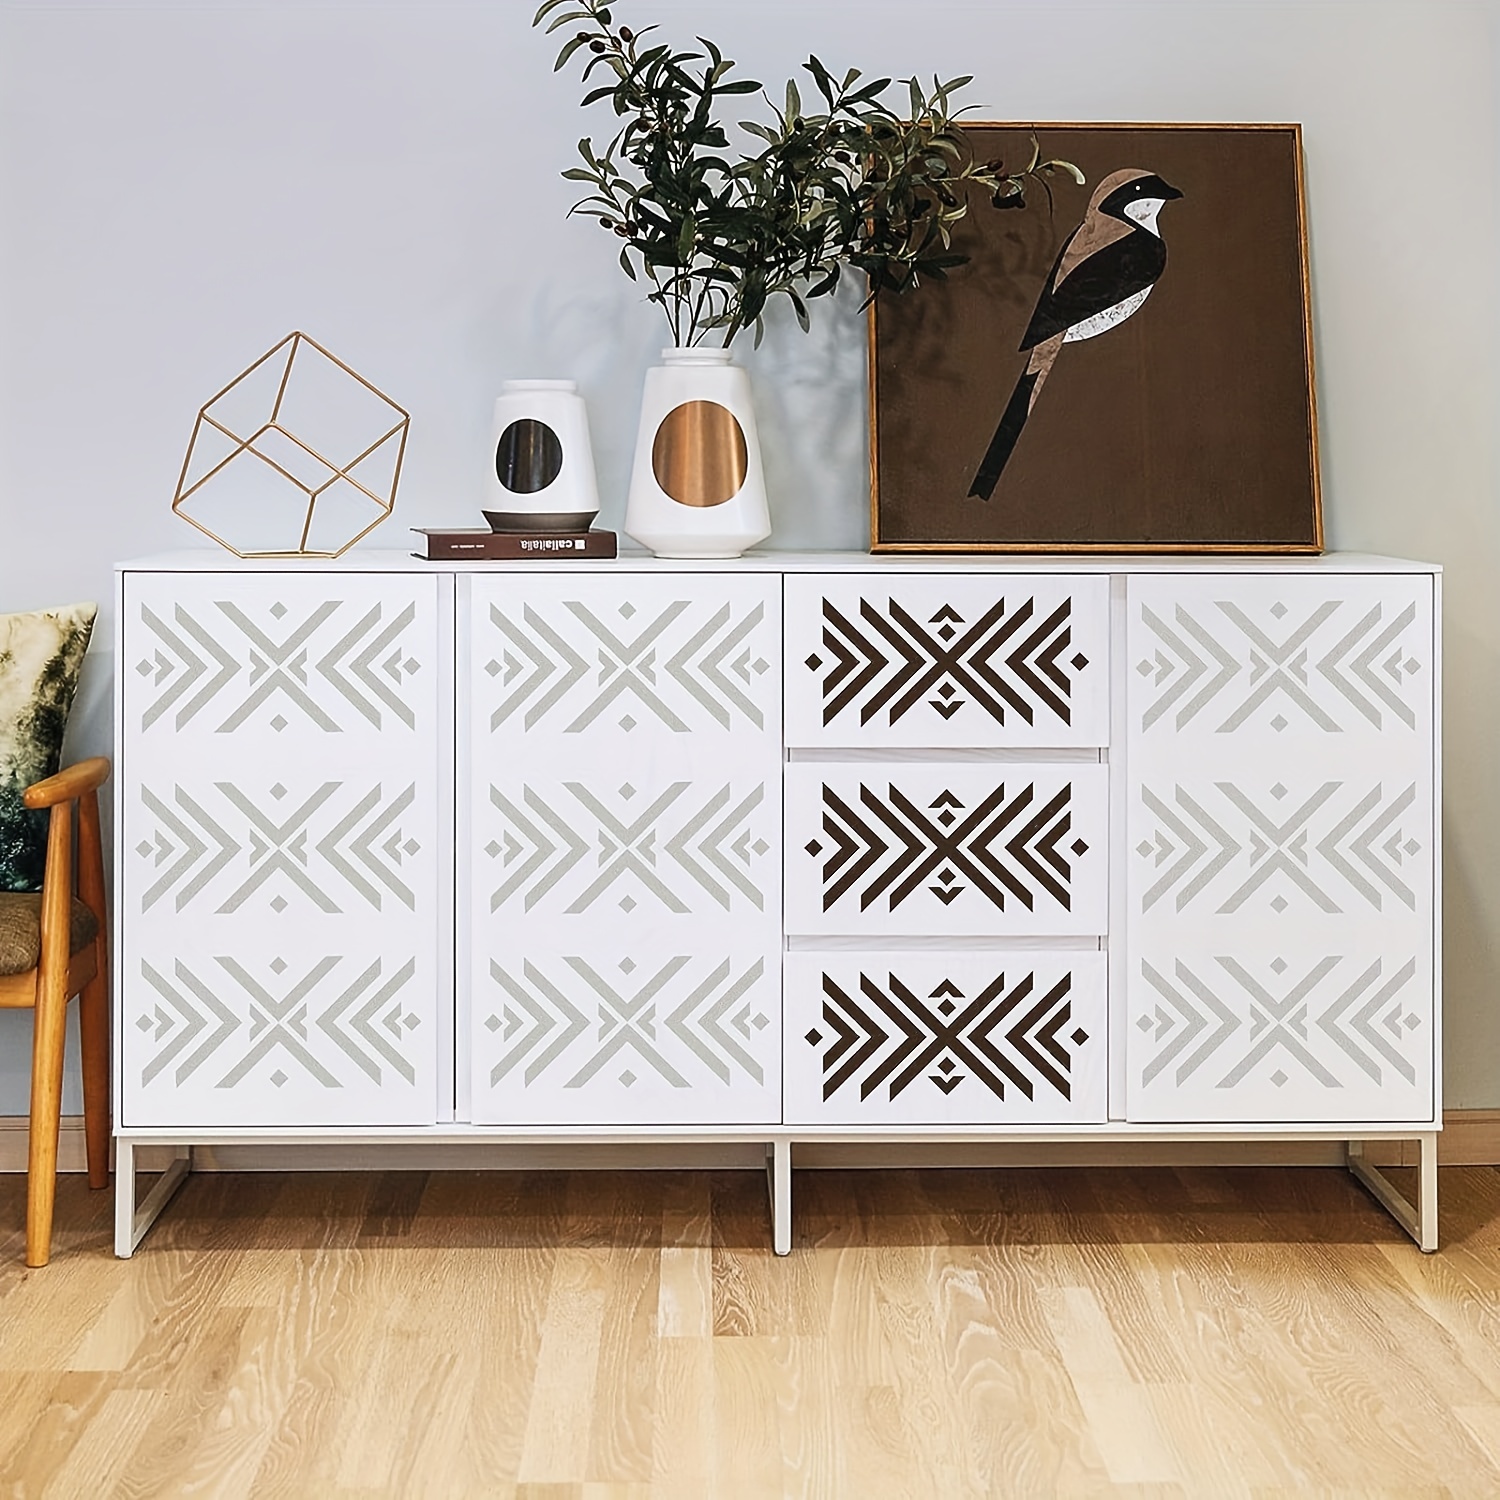 Tribal Geometric Stencils for Painting on Wood Furniture Wall